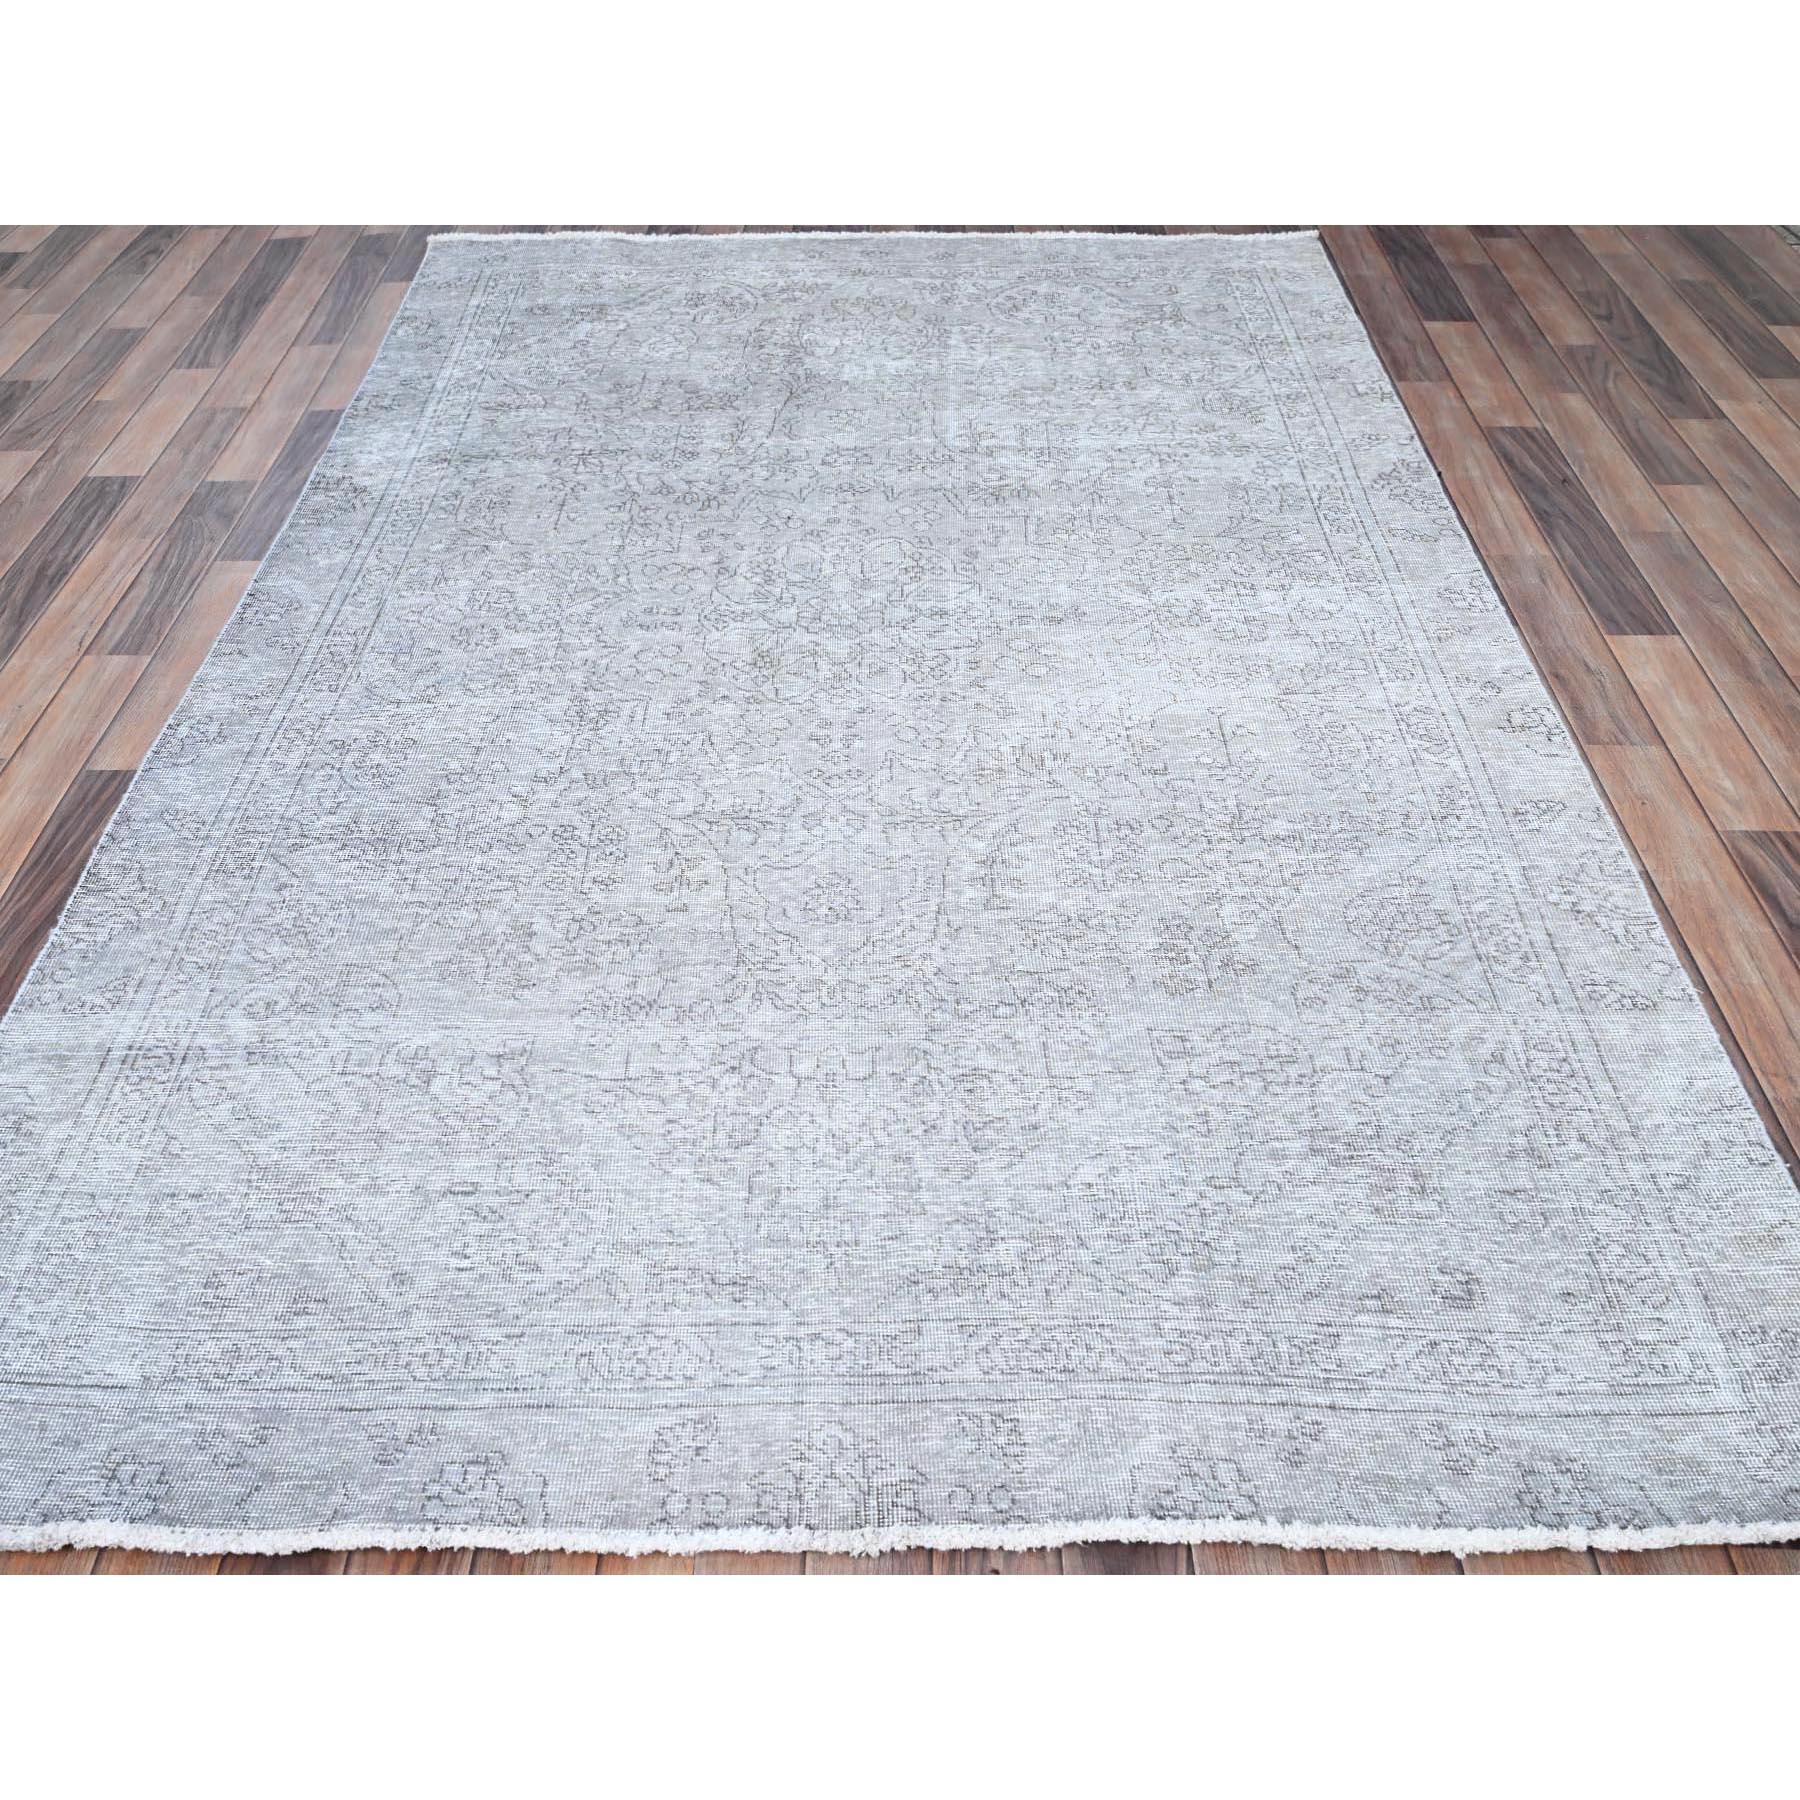 Hand-Knotted Gray Old Persian Tabriz All Over Design Worn Wool Rustic Look Hand Knotted Rug For Sale